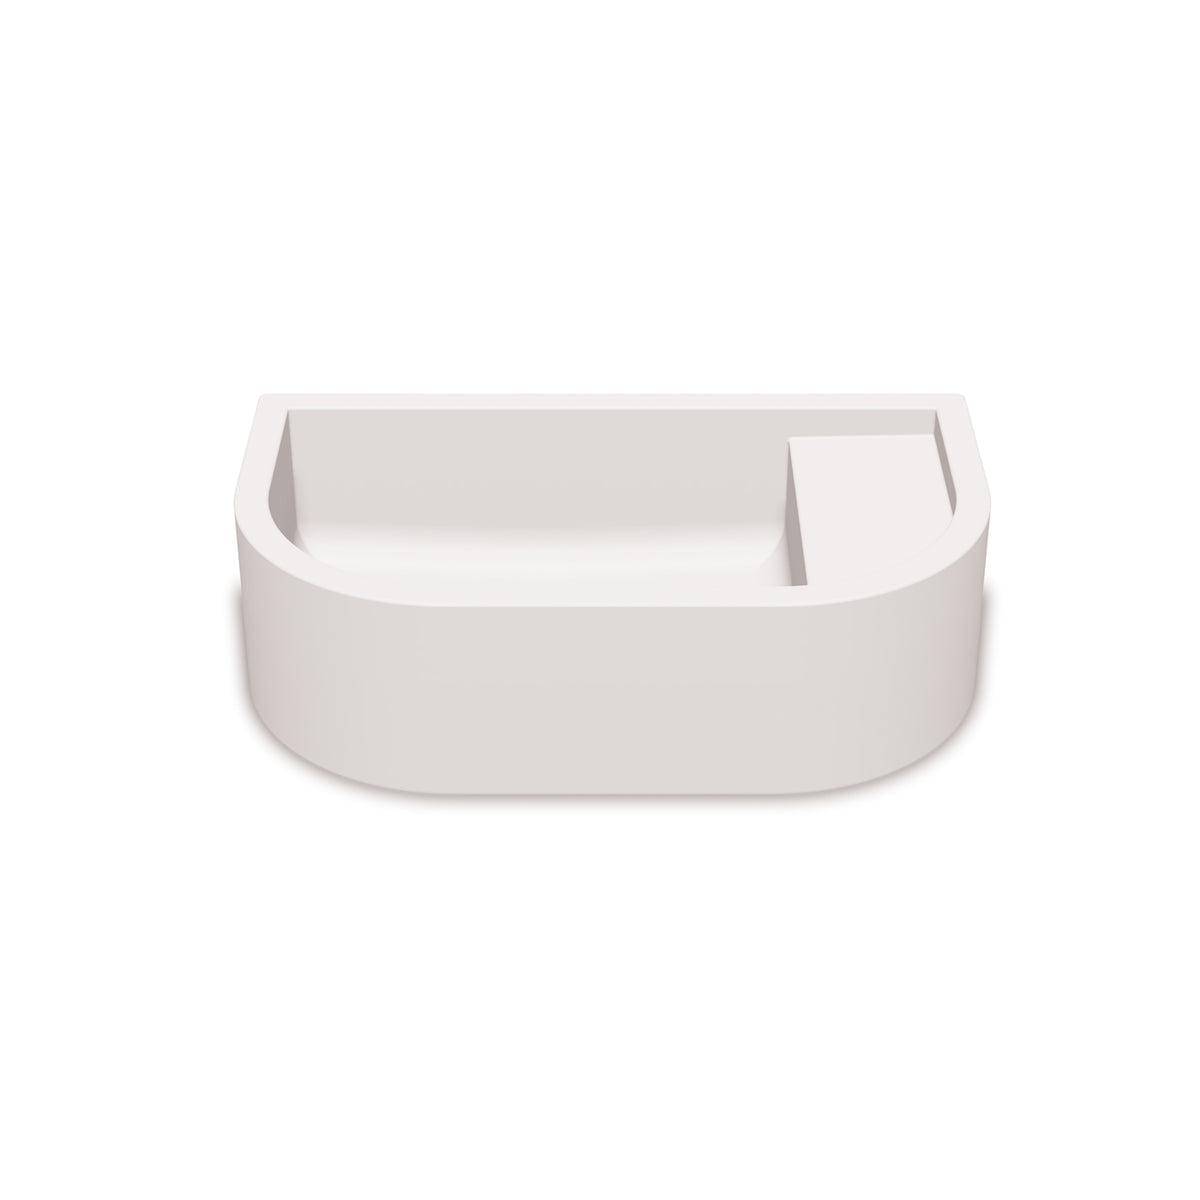 Loop 01 Basin - Overflow - Surface Mount (Ivory,No Tap Hole,White)